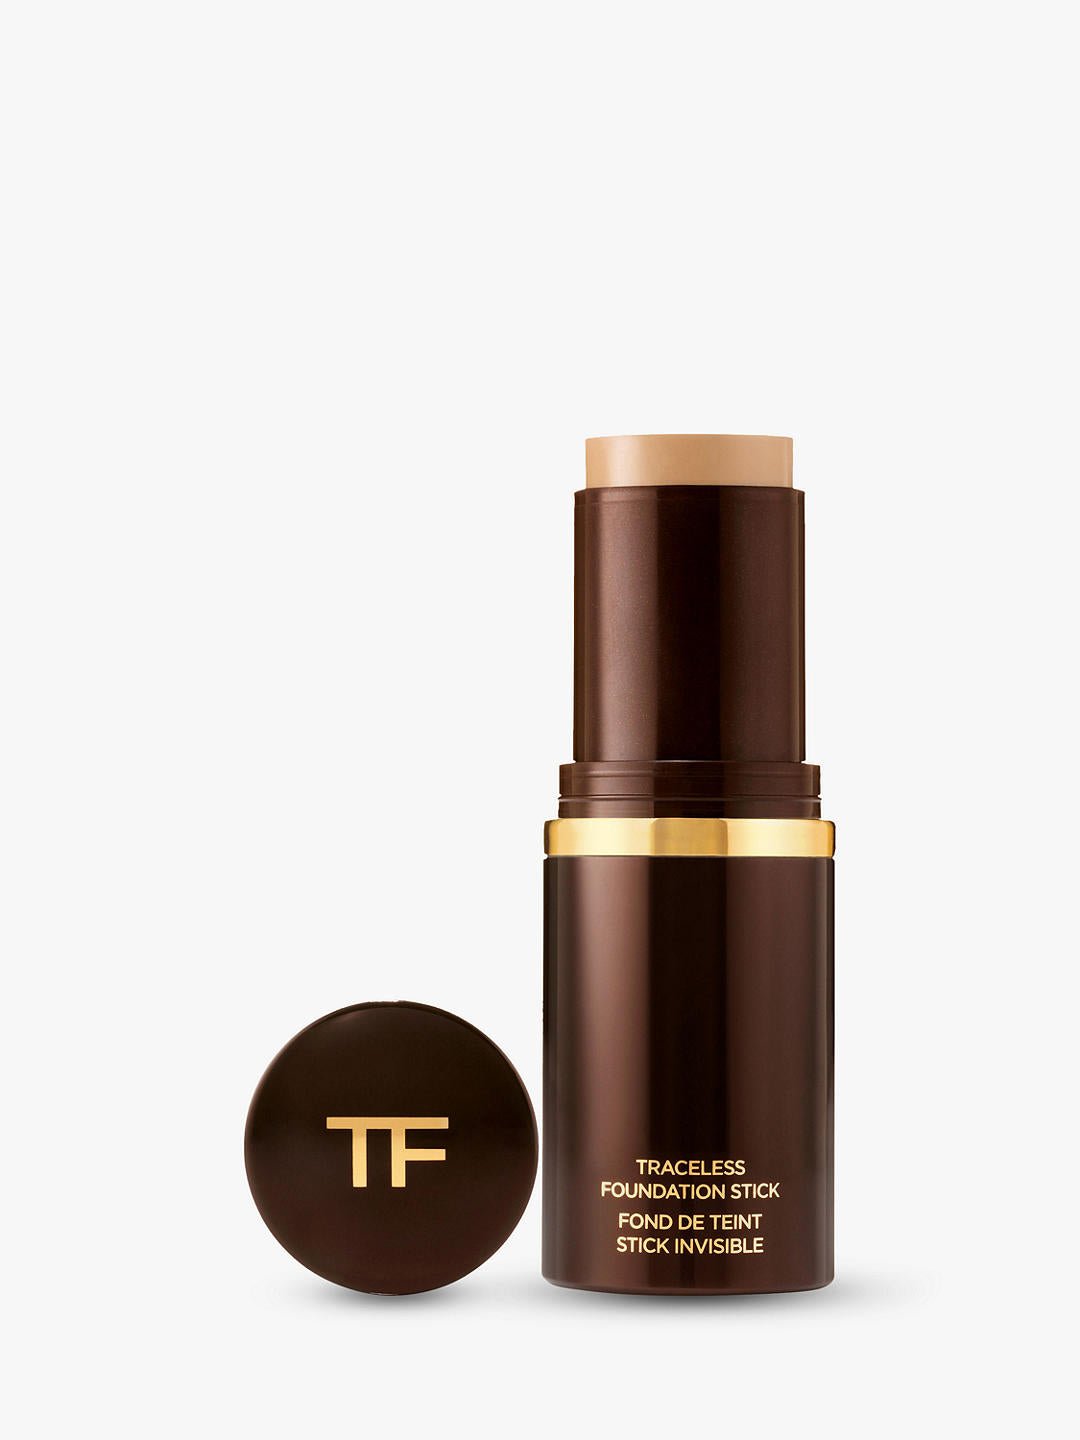 Tom Ford Traceless Foundation Stick - LookincredibleTom Ford888066018425